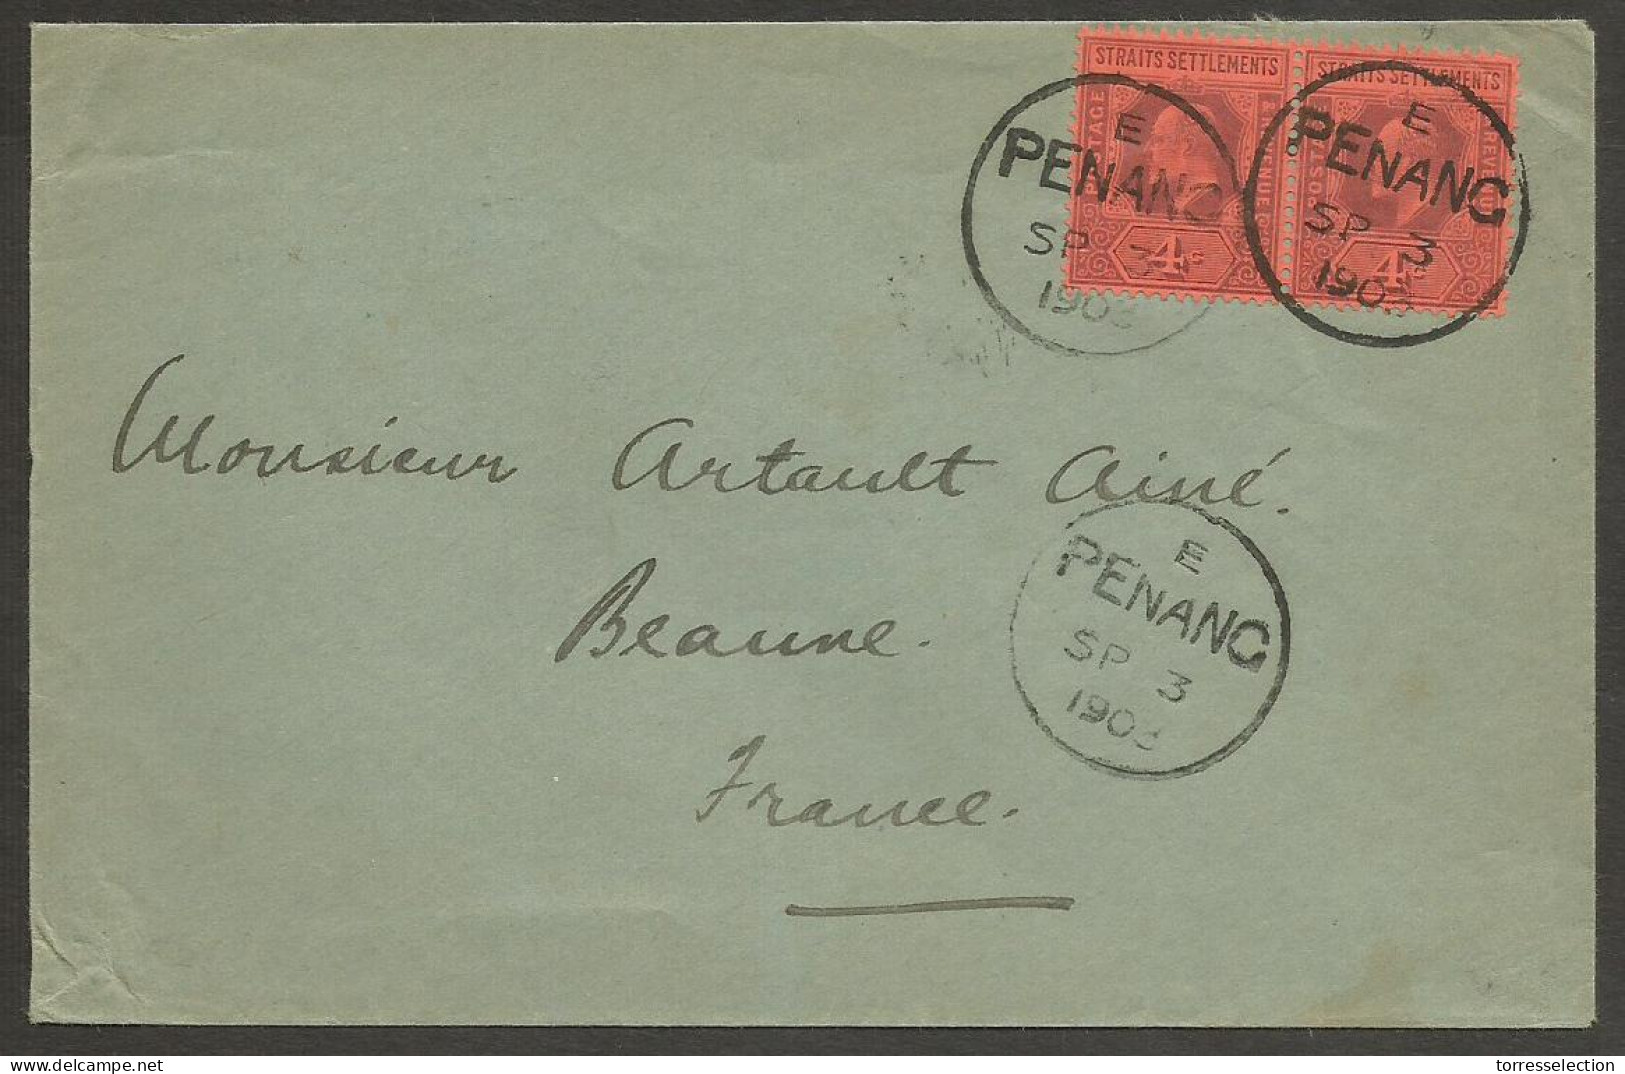 MALAYSIA. 1903 (3 Sept). Penang - France, Beaune (27 Sept). St S Stamps 4c Red Pair Tied Cds. Lovely Usage. - Malaysia (1964-...)